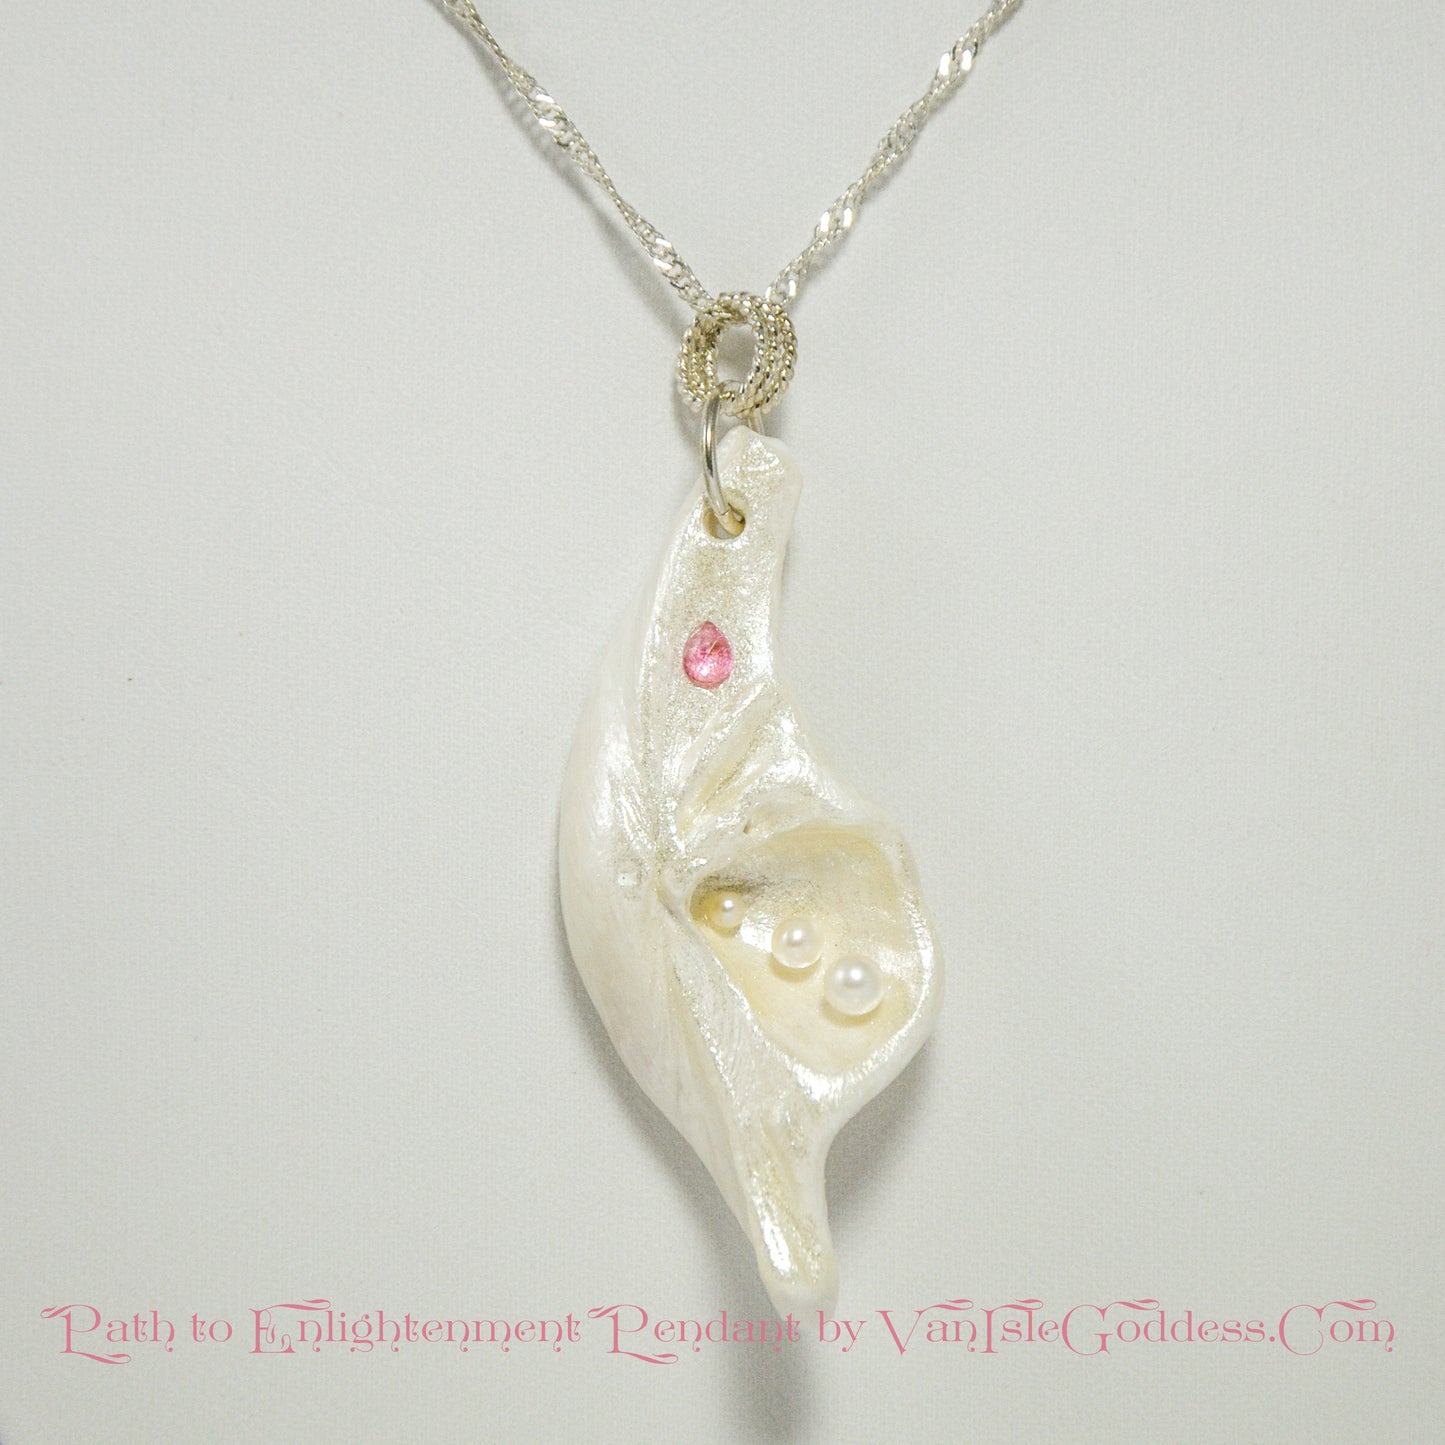 A trio of white baby freshwater pearls and a teardrop rose cut pink tourmaline gemstone compliments the seashell pendant beautifully.